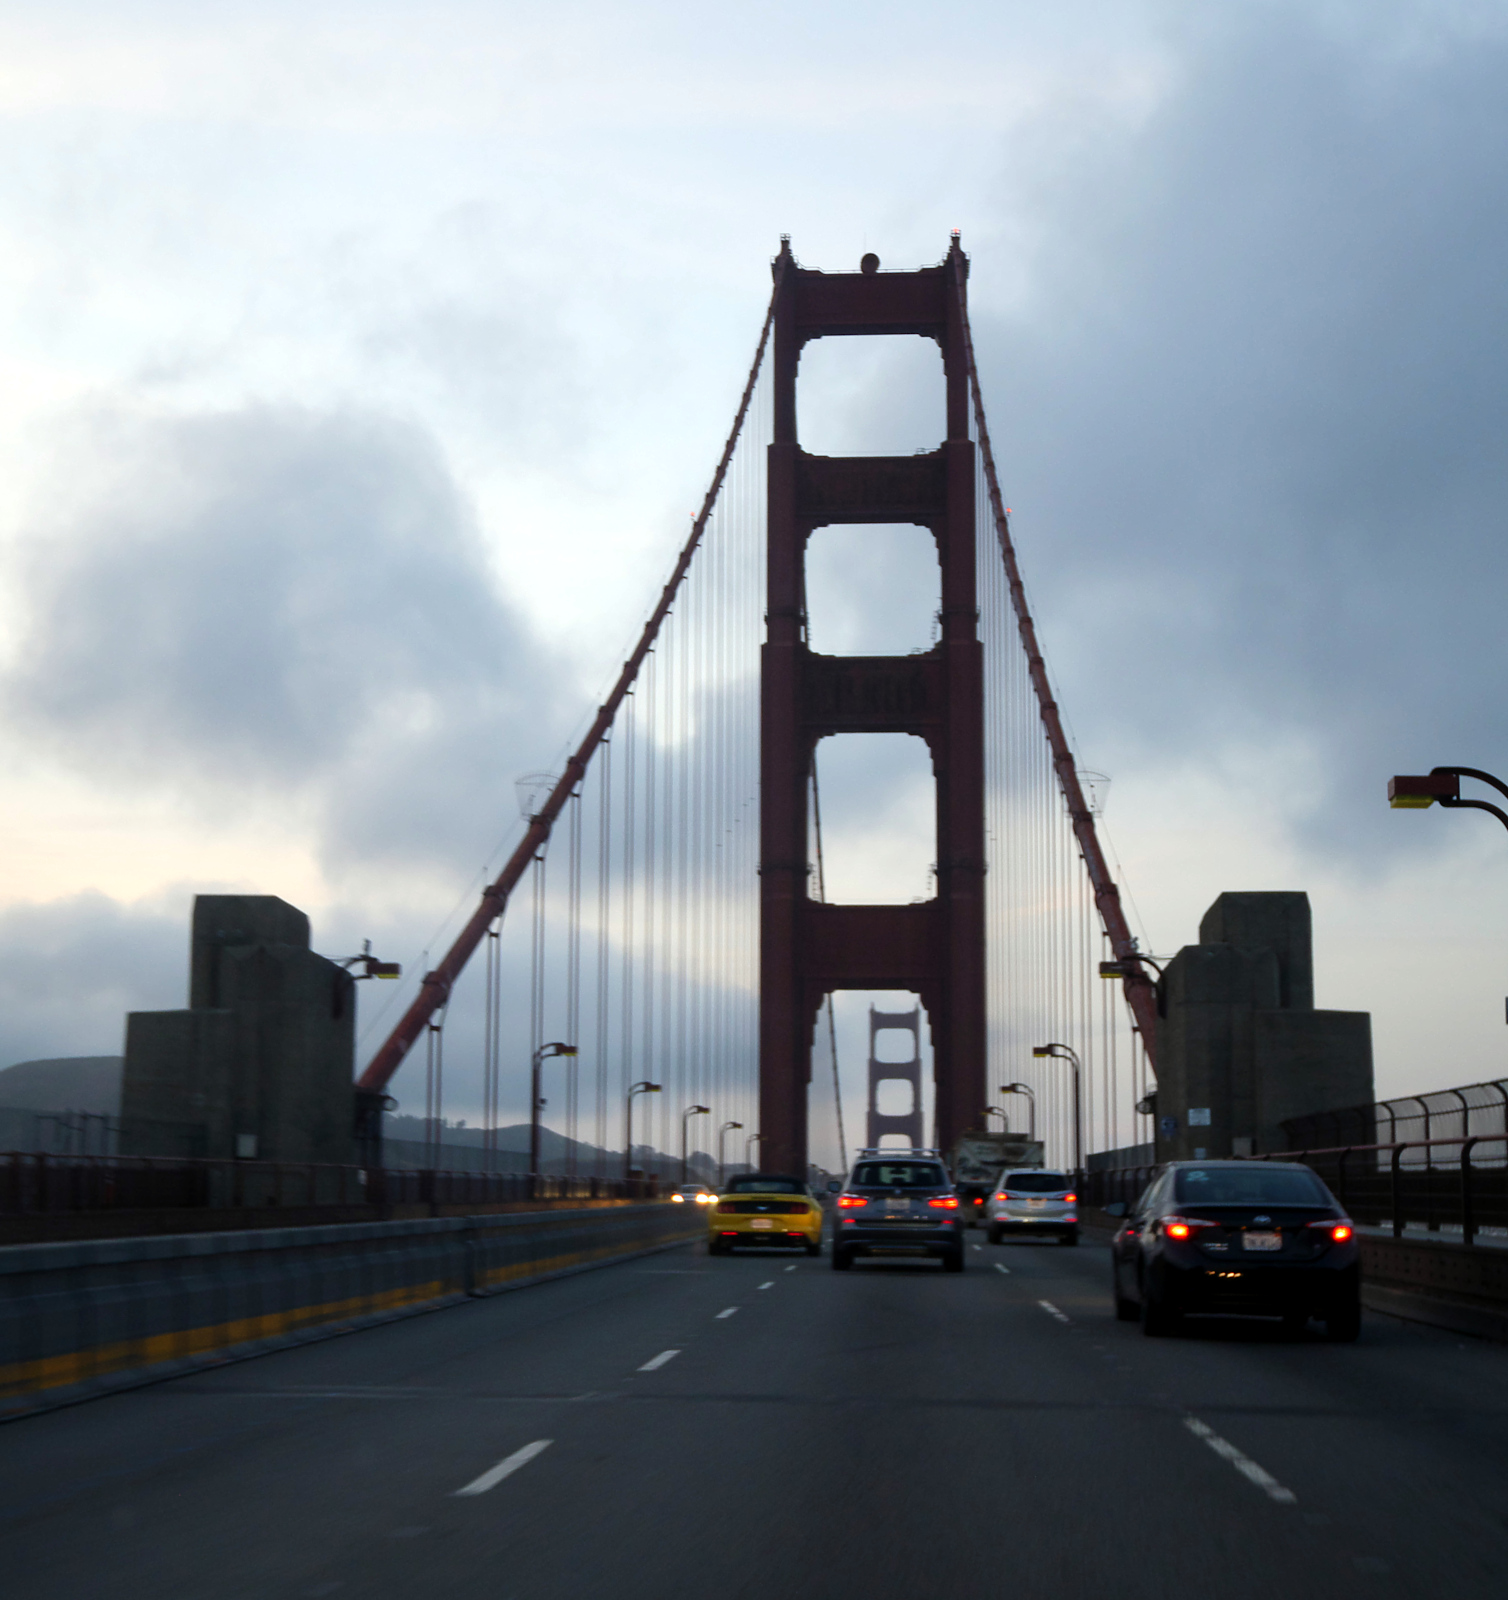 The Golden Gate Bridge of California: six lanes of traffic and not a rail line in sight.